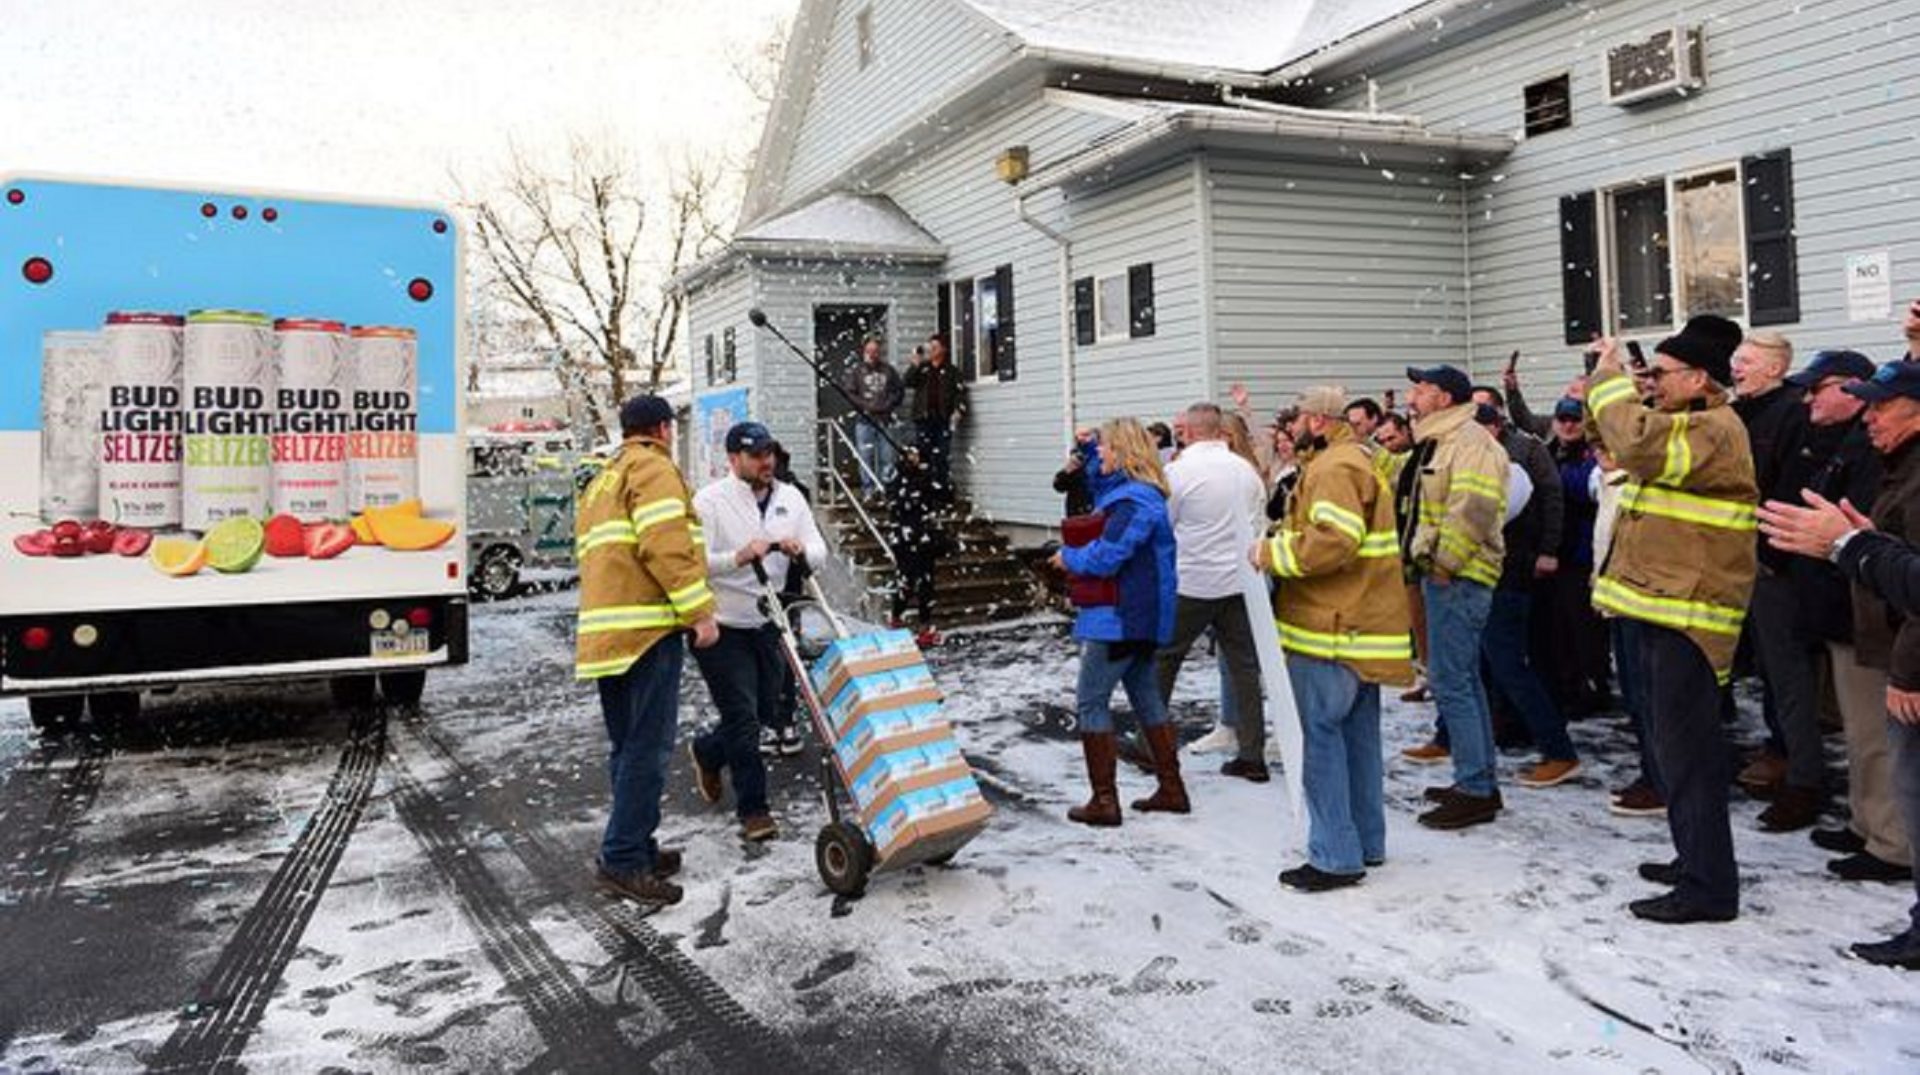 Members of the Seltzer Hose Company cheer the inaugural delivery of Bud Light Seltzer, a new product that their community's name has been both borrowed and amplified for a national launch campaign.